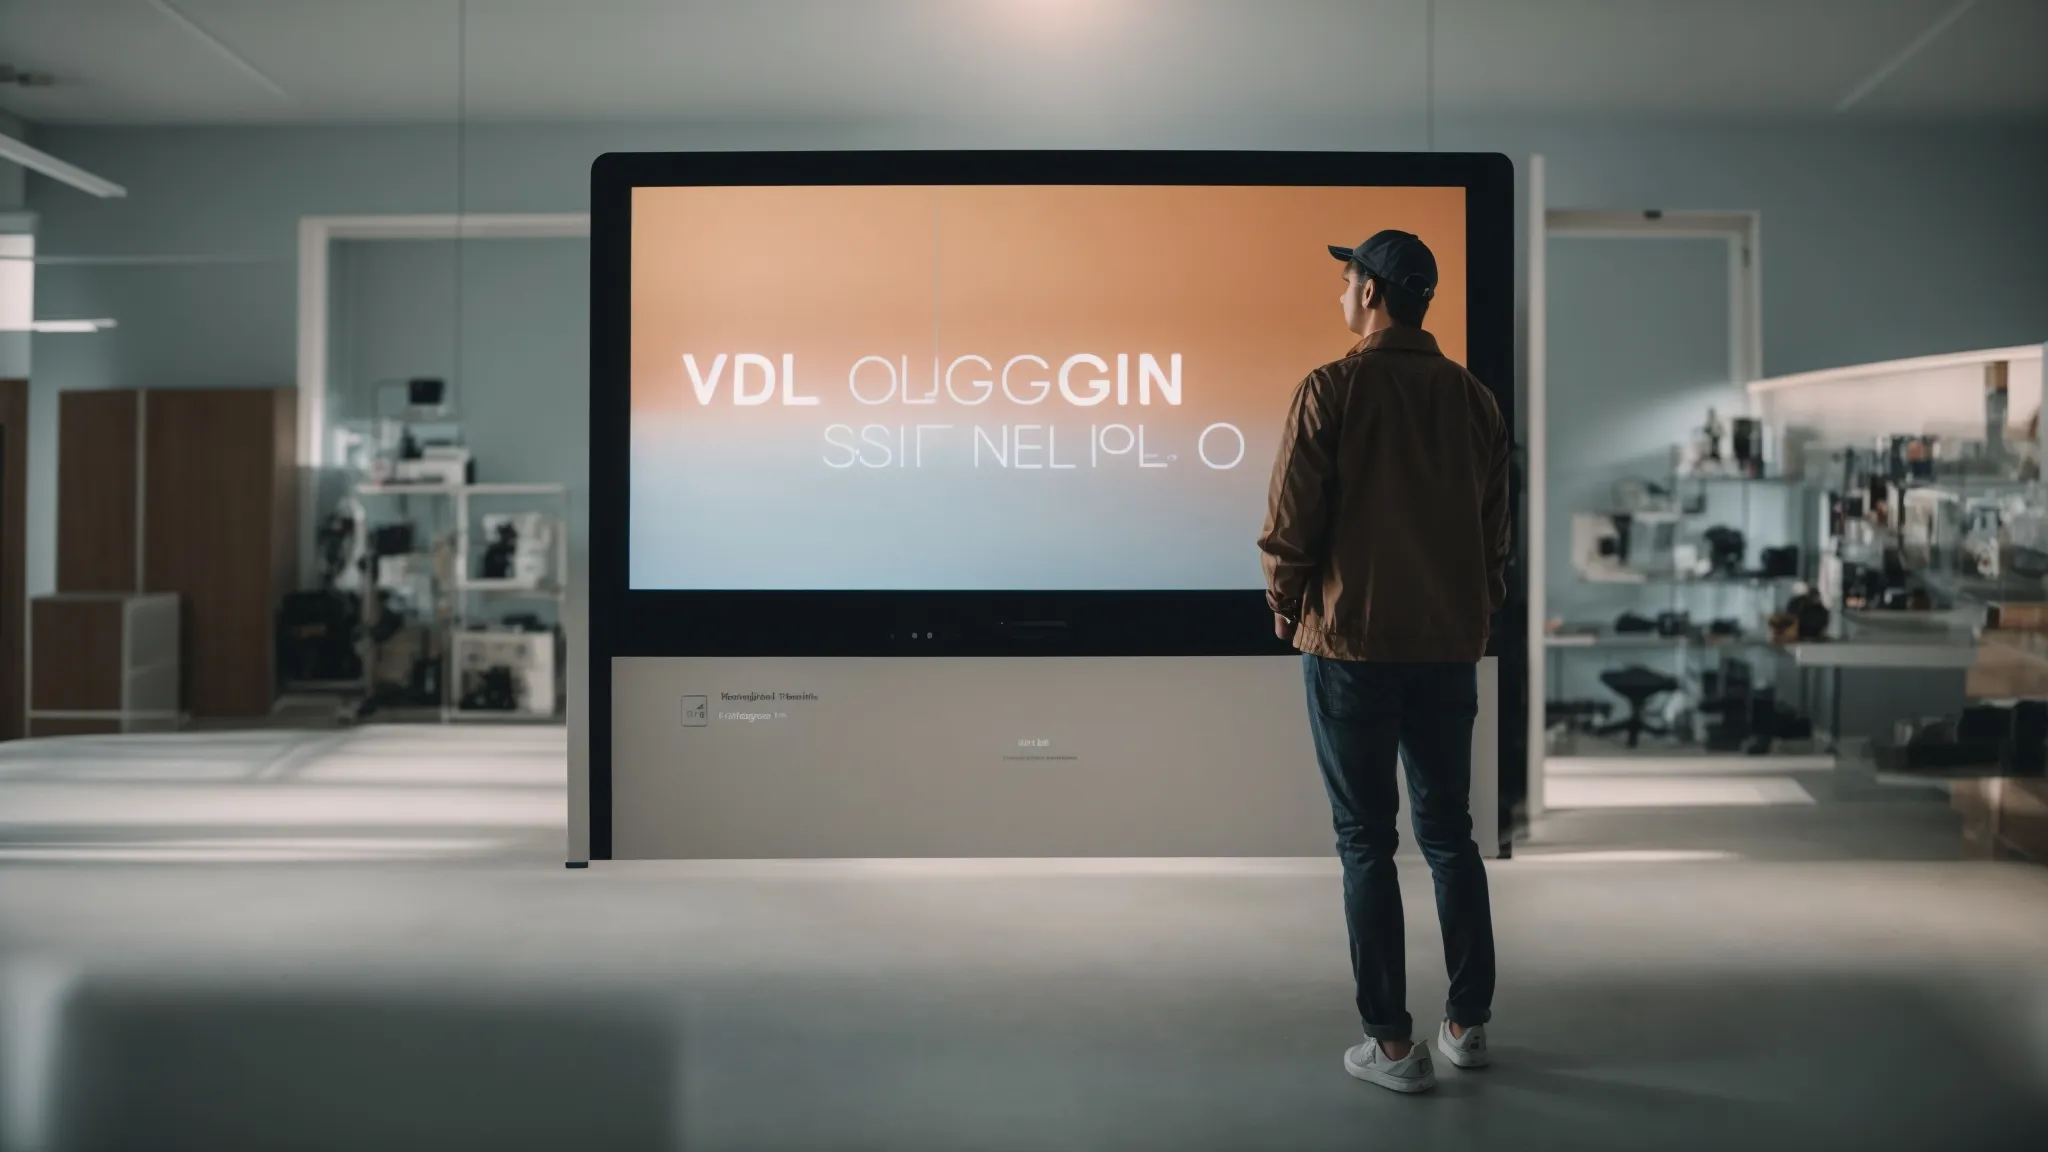 a creator stands before a split screen displaying text on one side and a video on the other, symbolizing the choice between blogging and vlogging.